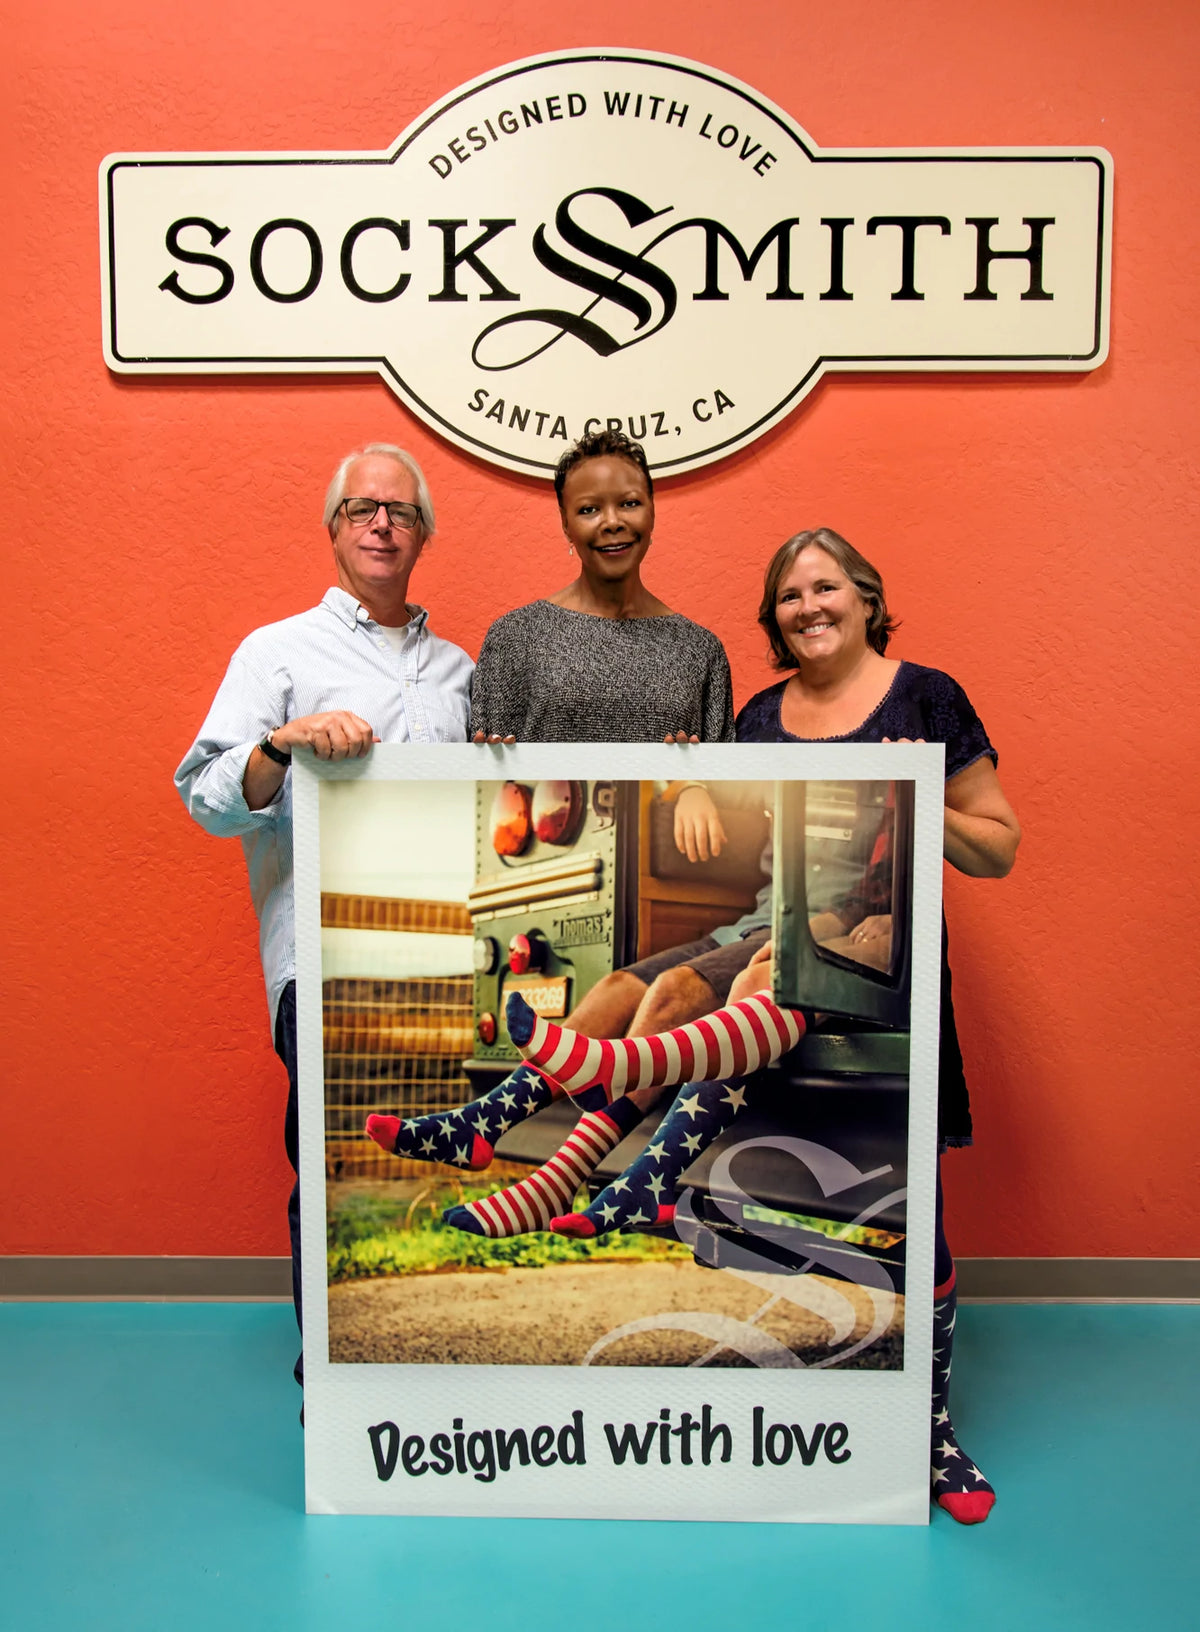 The Socksmith Owners: Eric, Cassandra, and Ellen